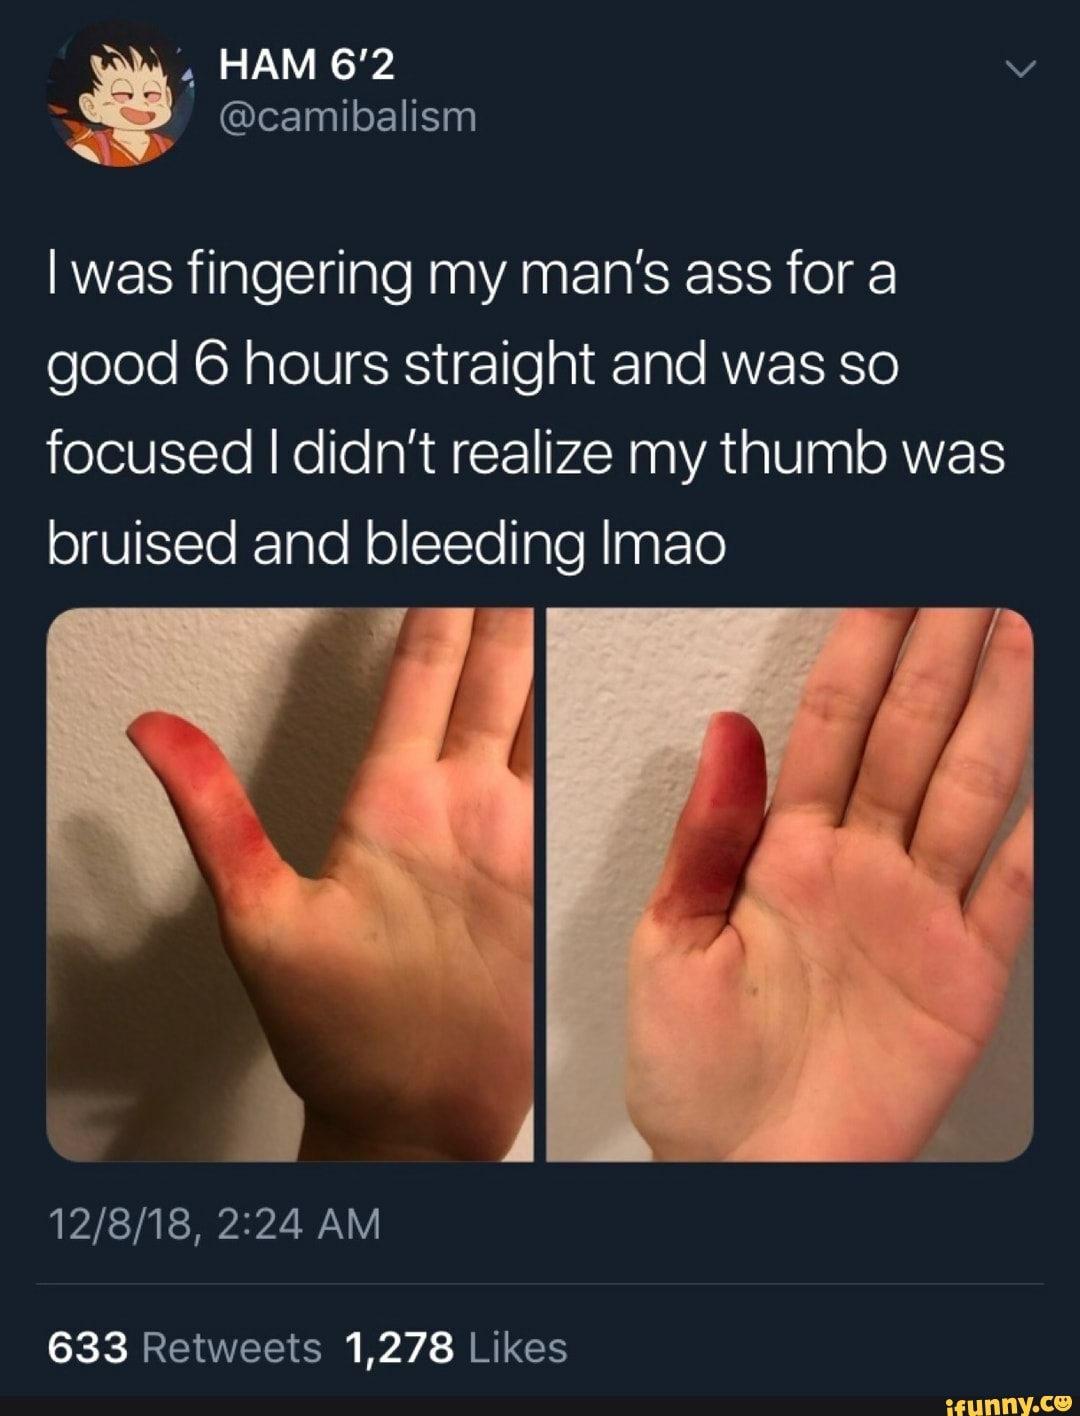 I was fingering my man’s ass for a good 6 hours straight and was so focused...